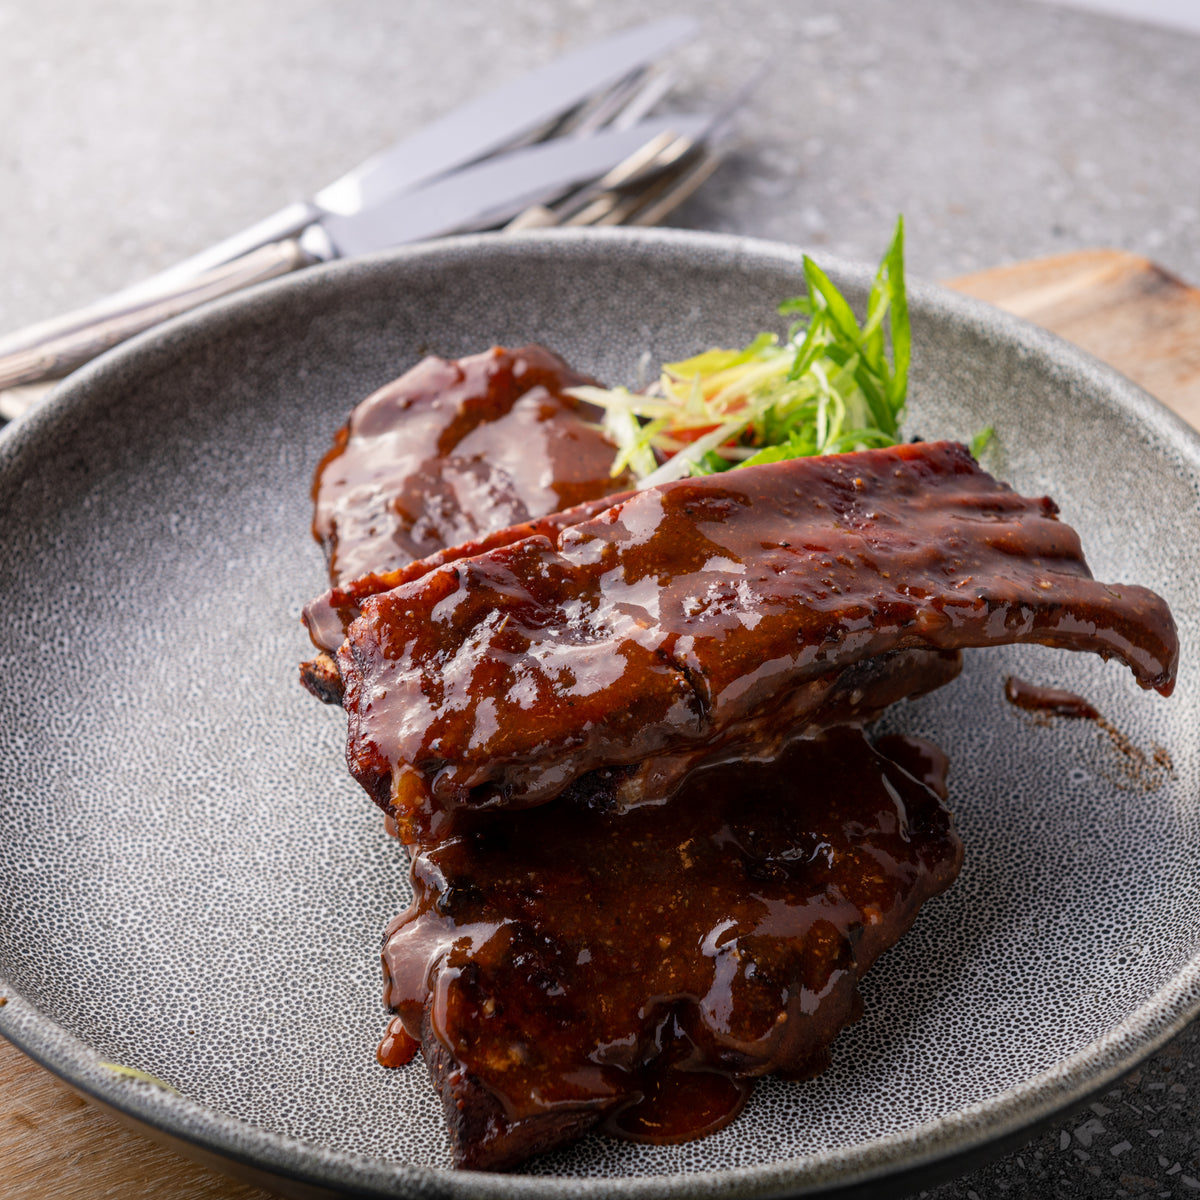 barbeque style Cola Ribs with a side salad meal kit by fitfood nz